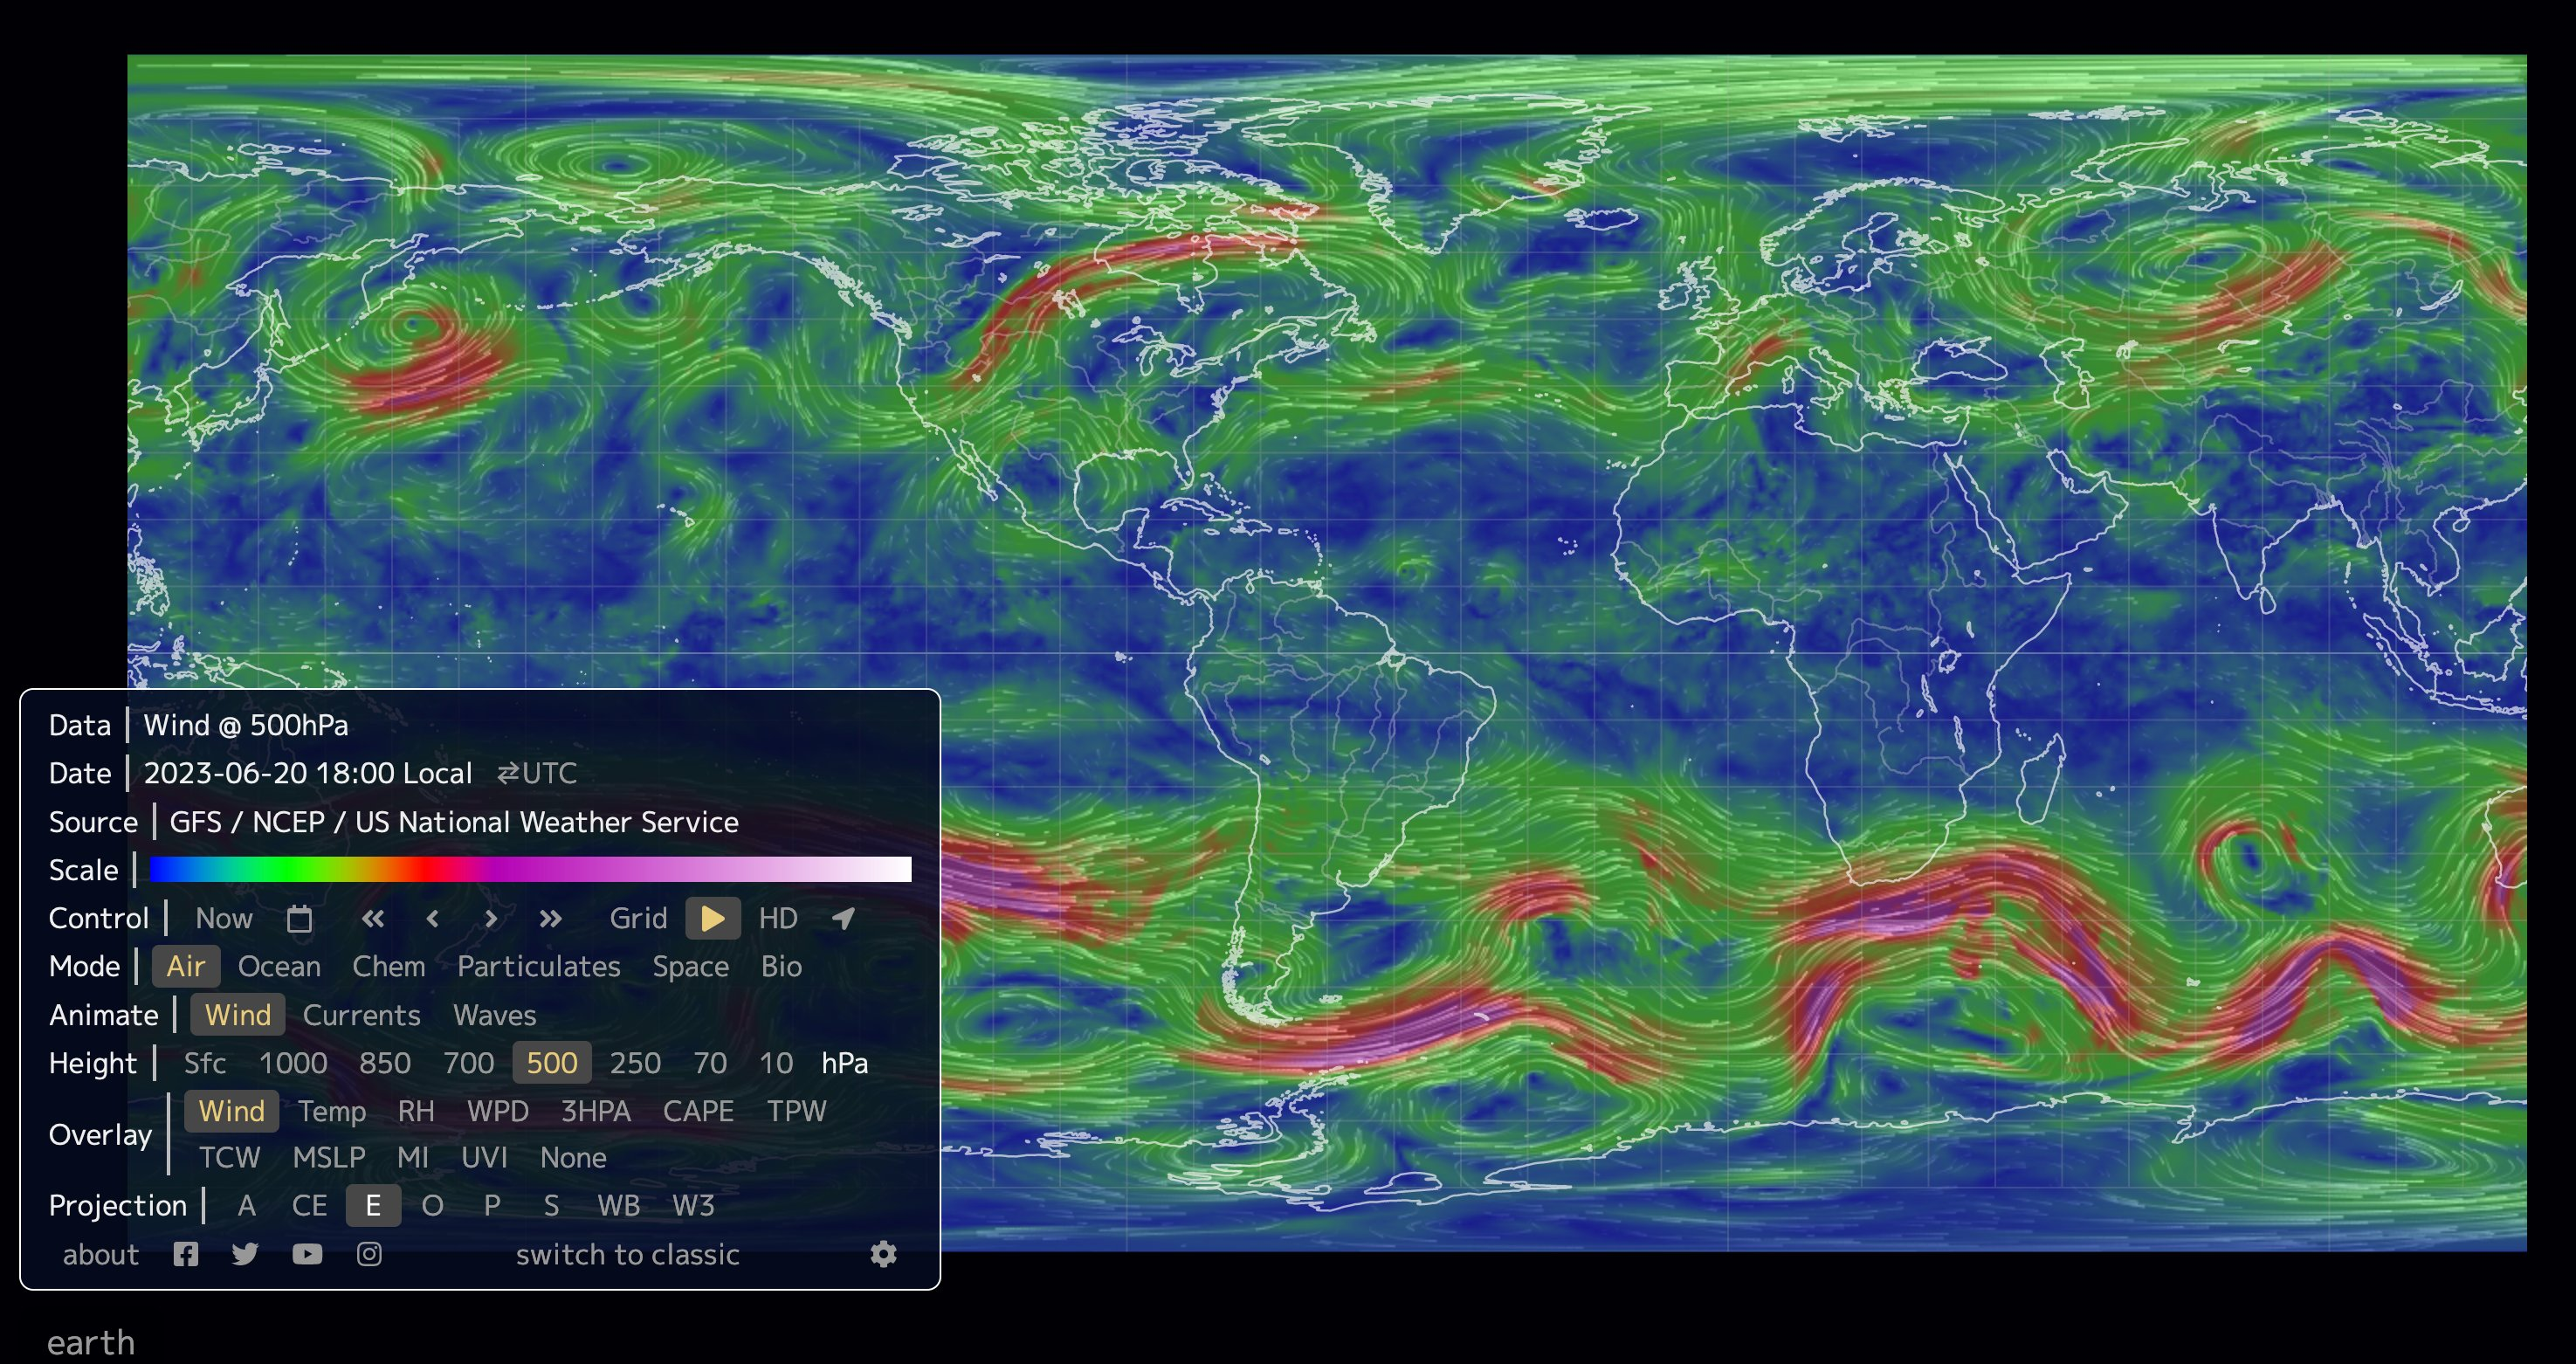 Prof. Michael E. Mann posted this map of wind speeds at at 500 hPa on 20 June 2023. He commented, “I'm honestly at a loss to even characterize the current large-scale planetary wave pattern. Frankly, it looks like a Van Gogh.” Data from https://earth.nullschool.net/#current/wind/isobaric/500hPa/equirectangular. Graphic: earth.nullschool.net